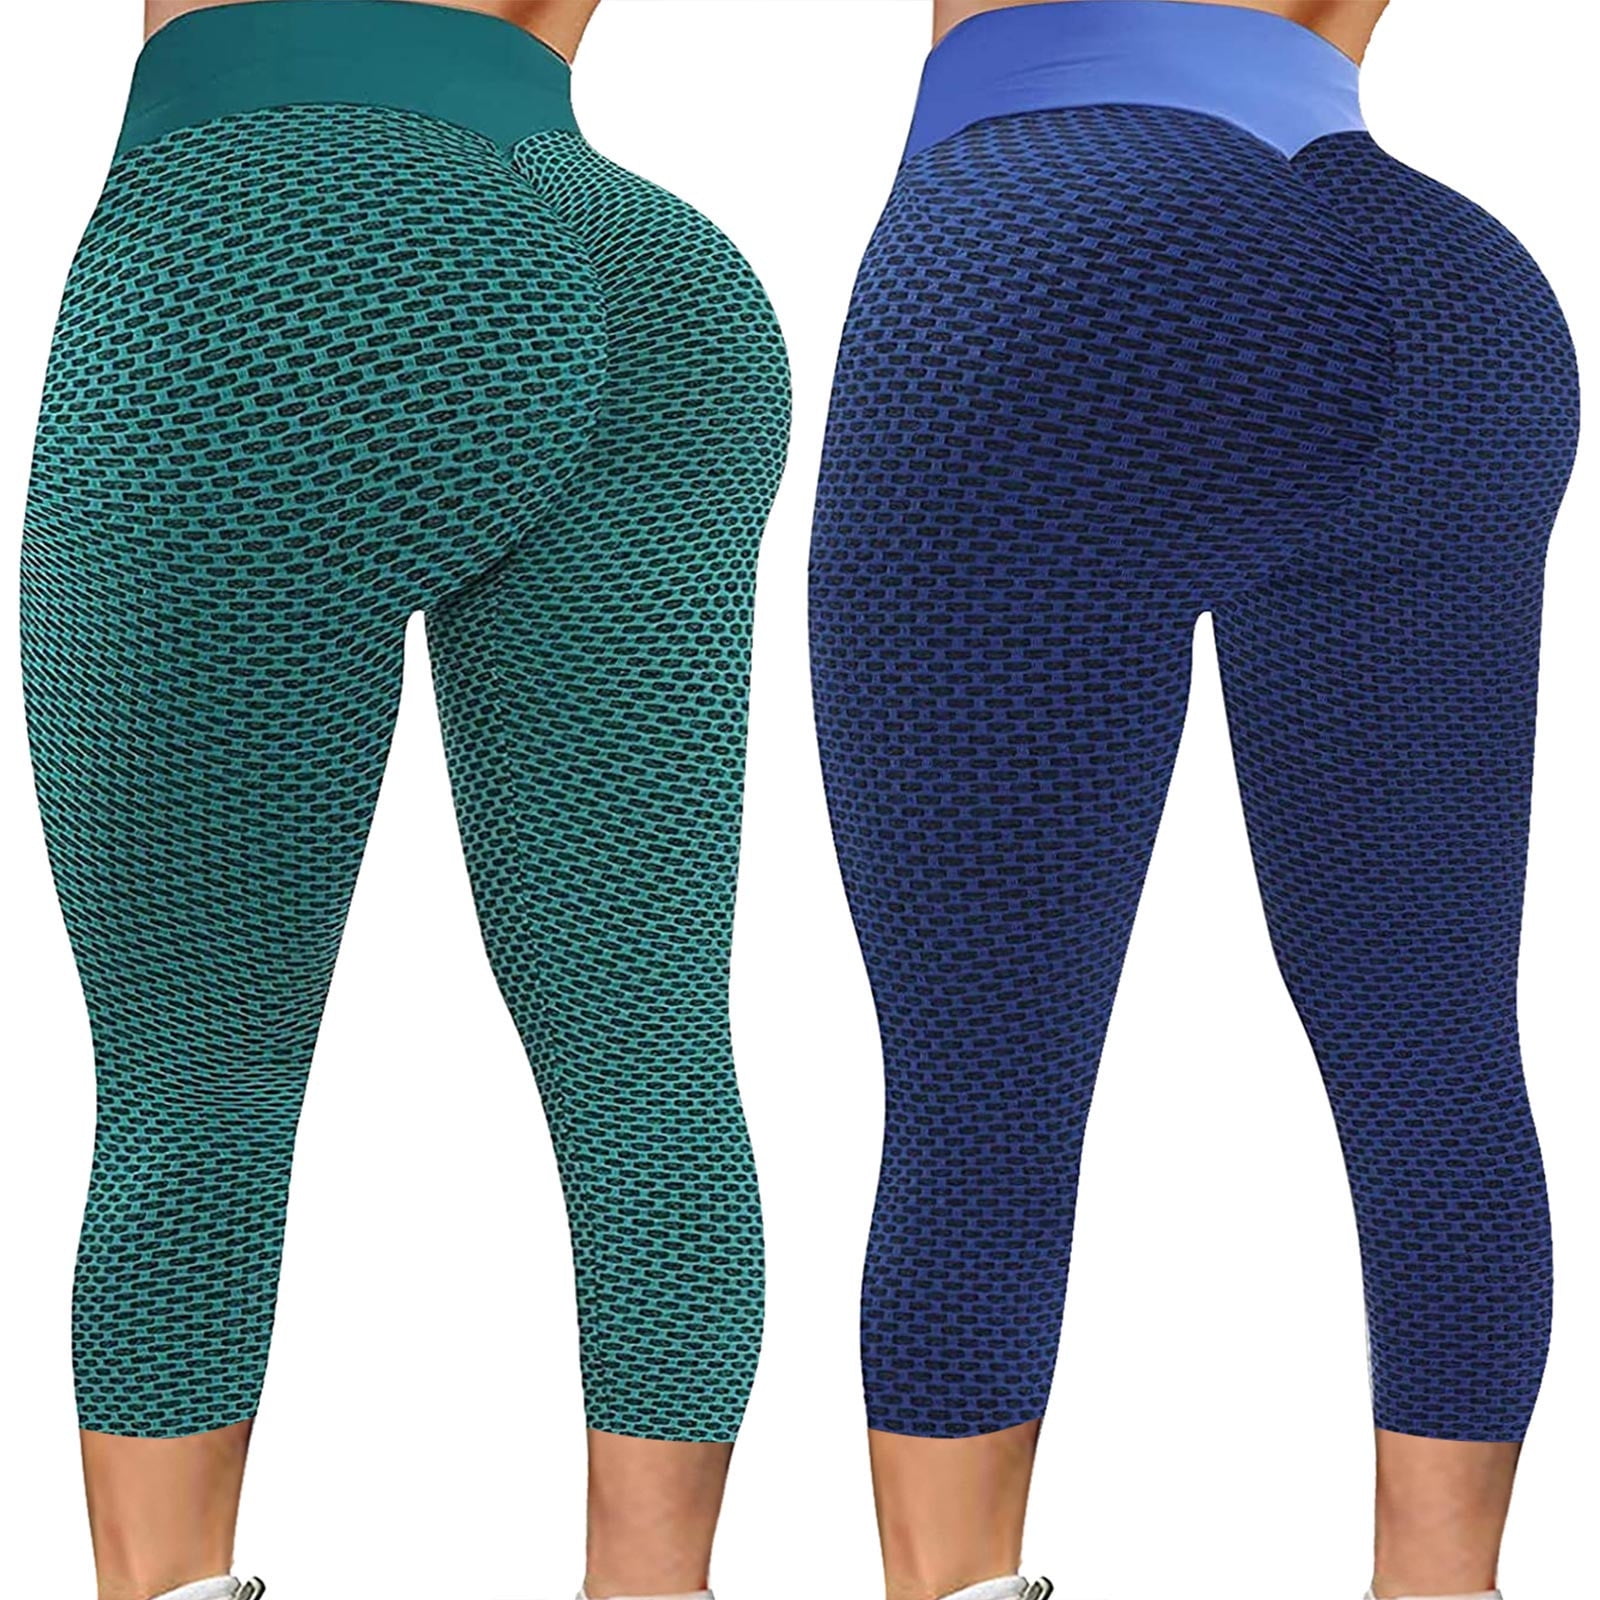 UK Womens Yoga Pants Fitness Leggings Running Gym Sports Compression Trousers